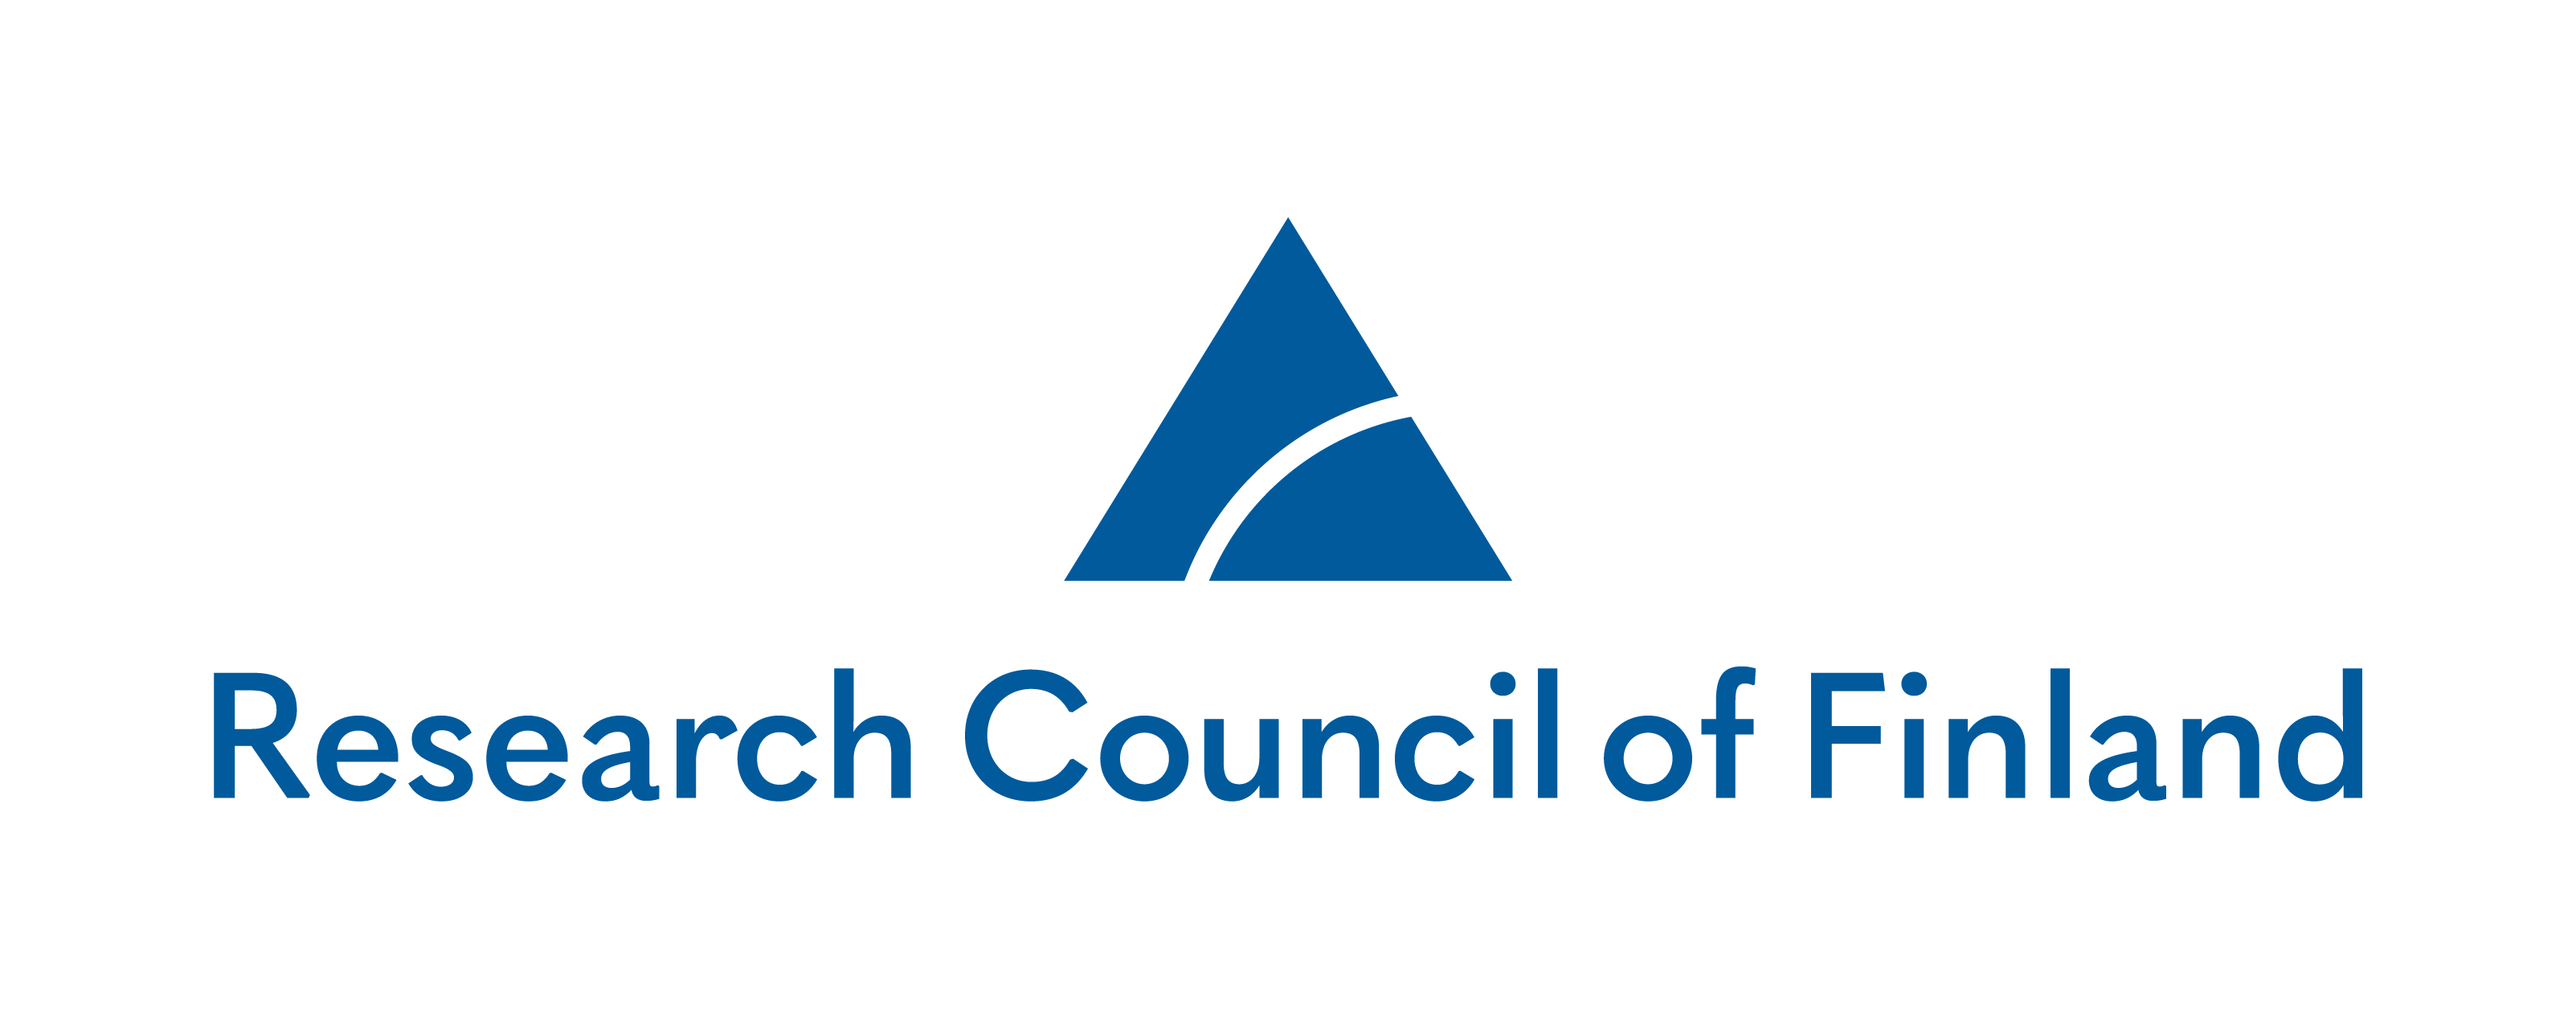 Research Council of Finland` logo